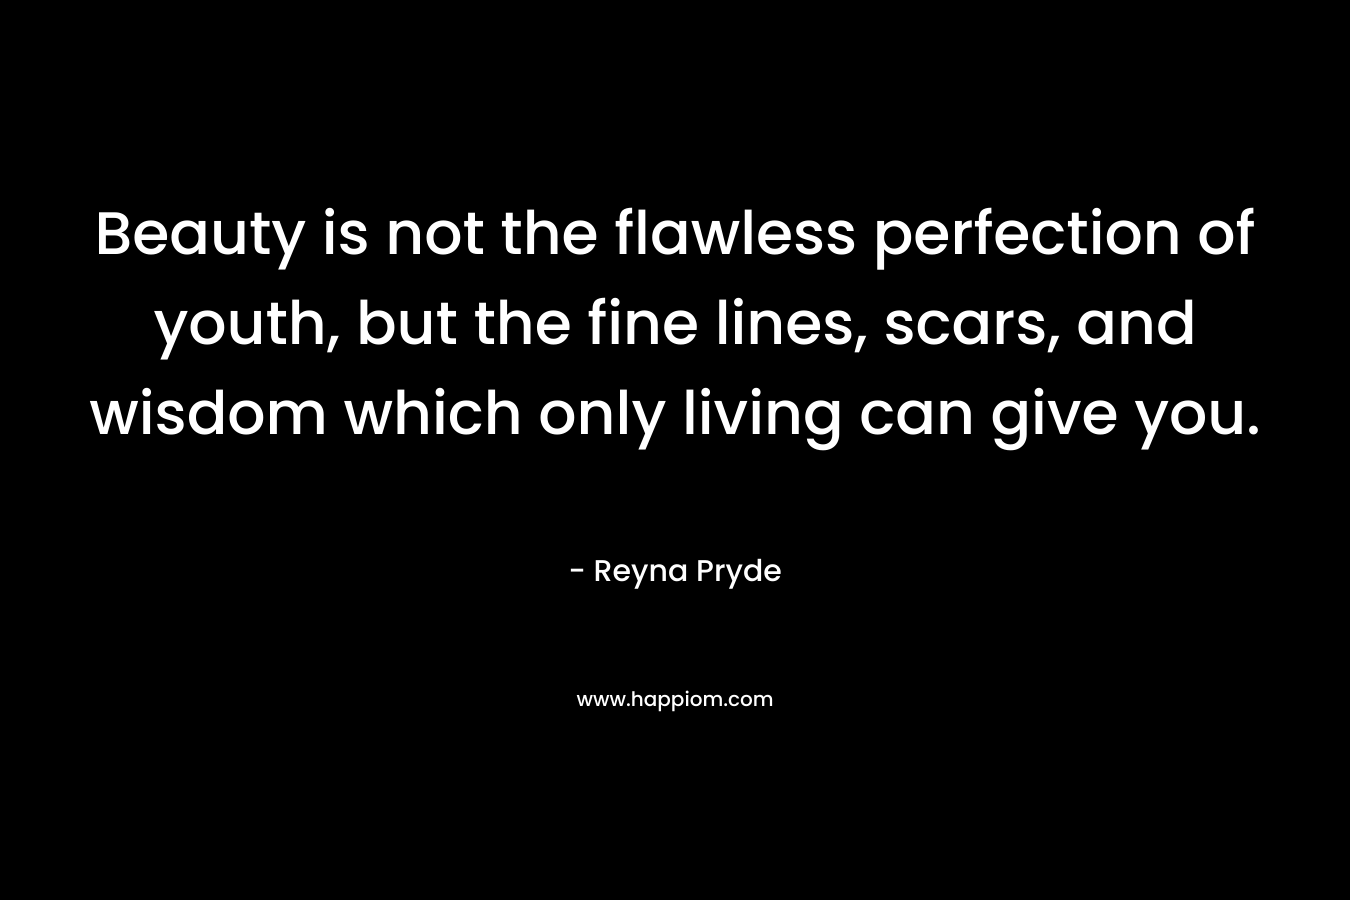 Beauty is not the flawless perfection of youth, but the fine lines, scars, and wisdom which only living can give you. – Reyna Pryde